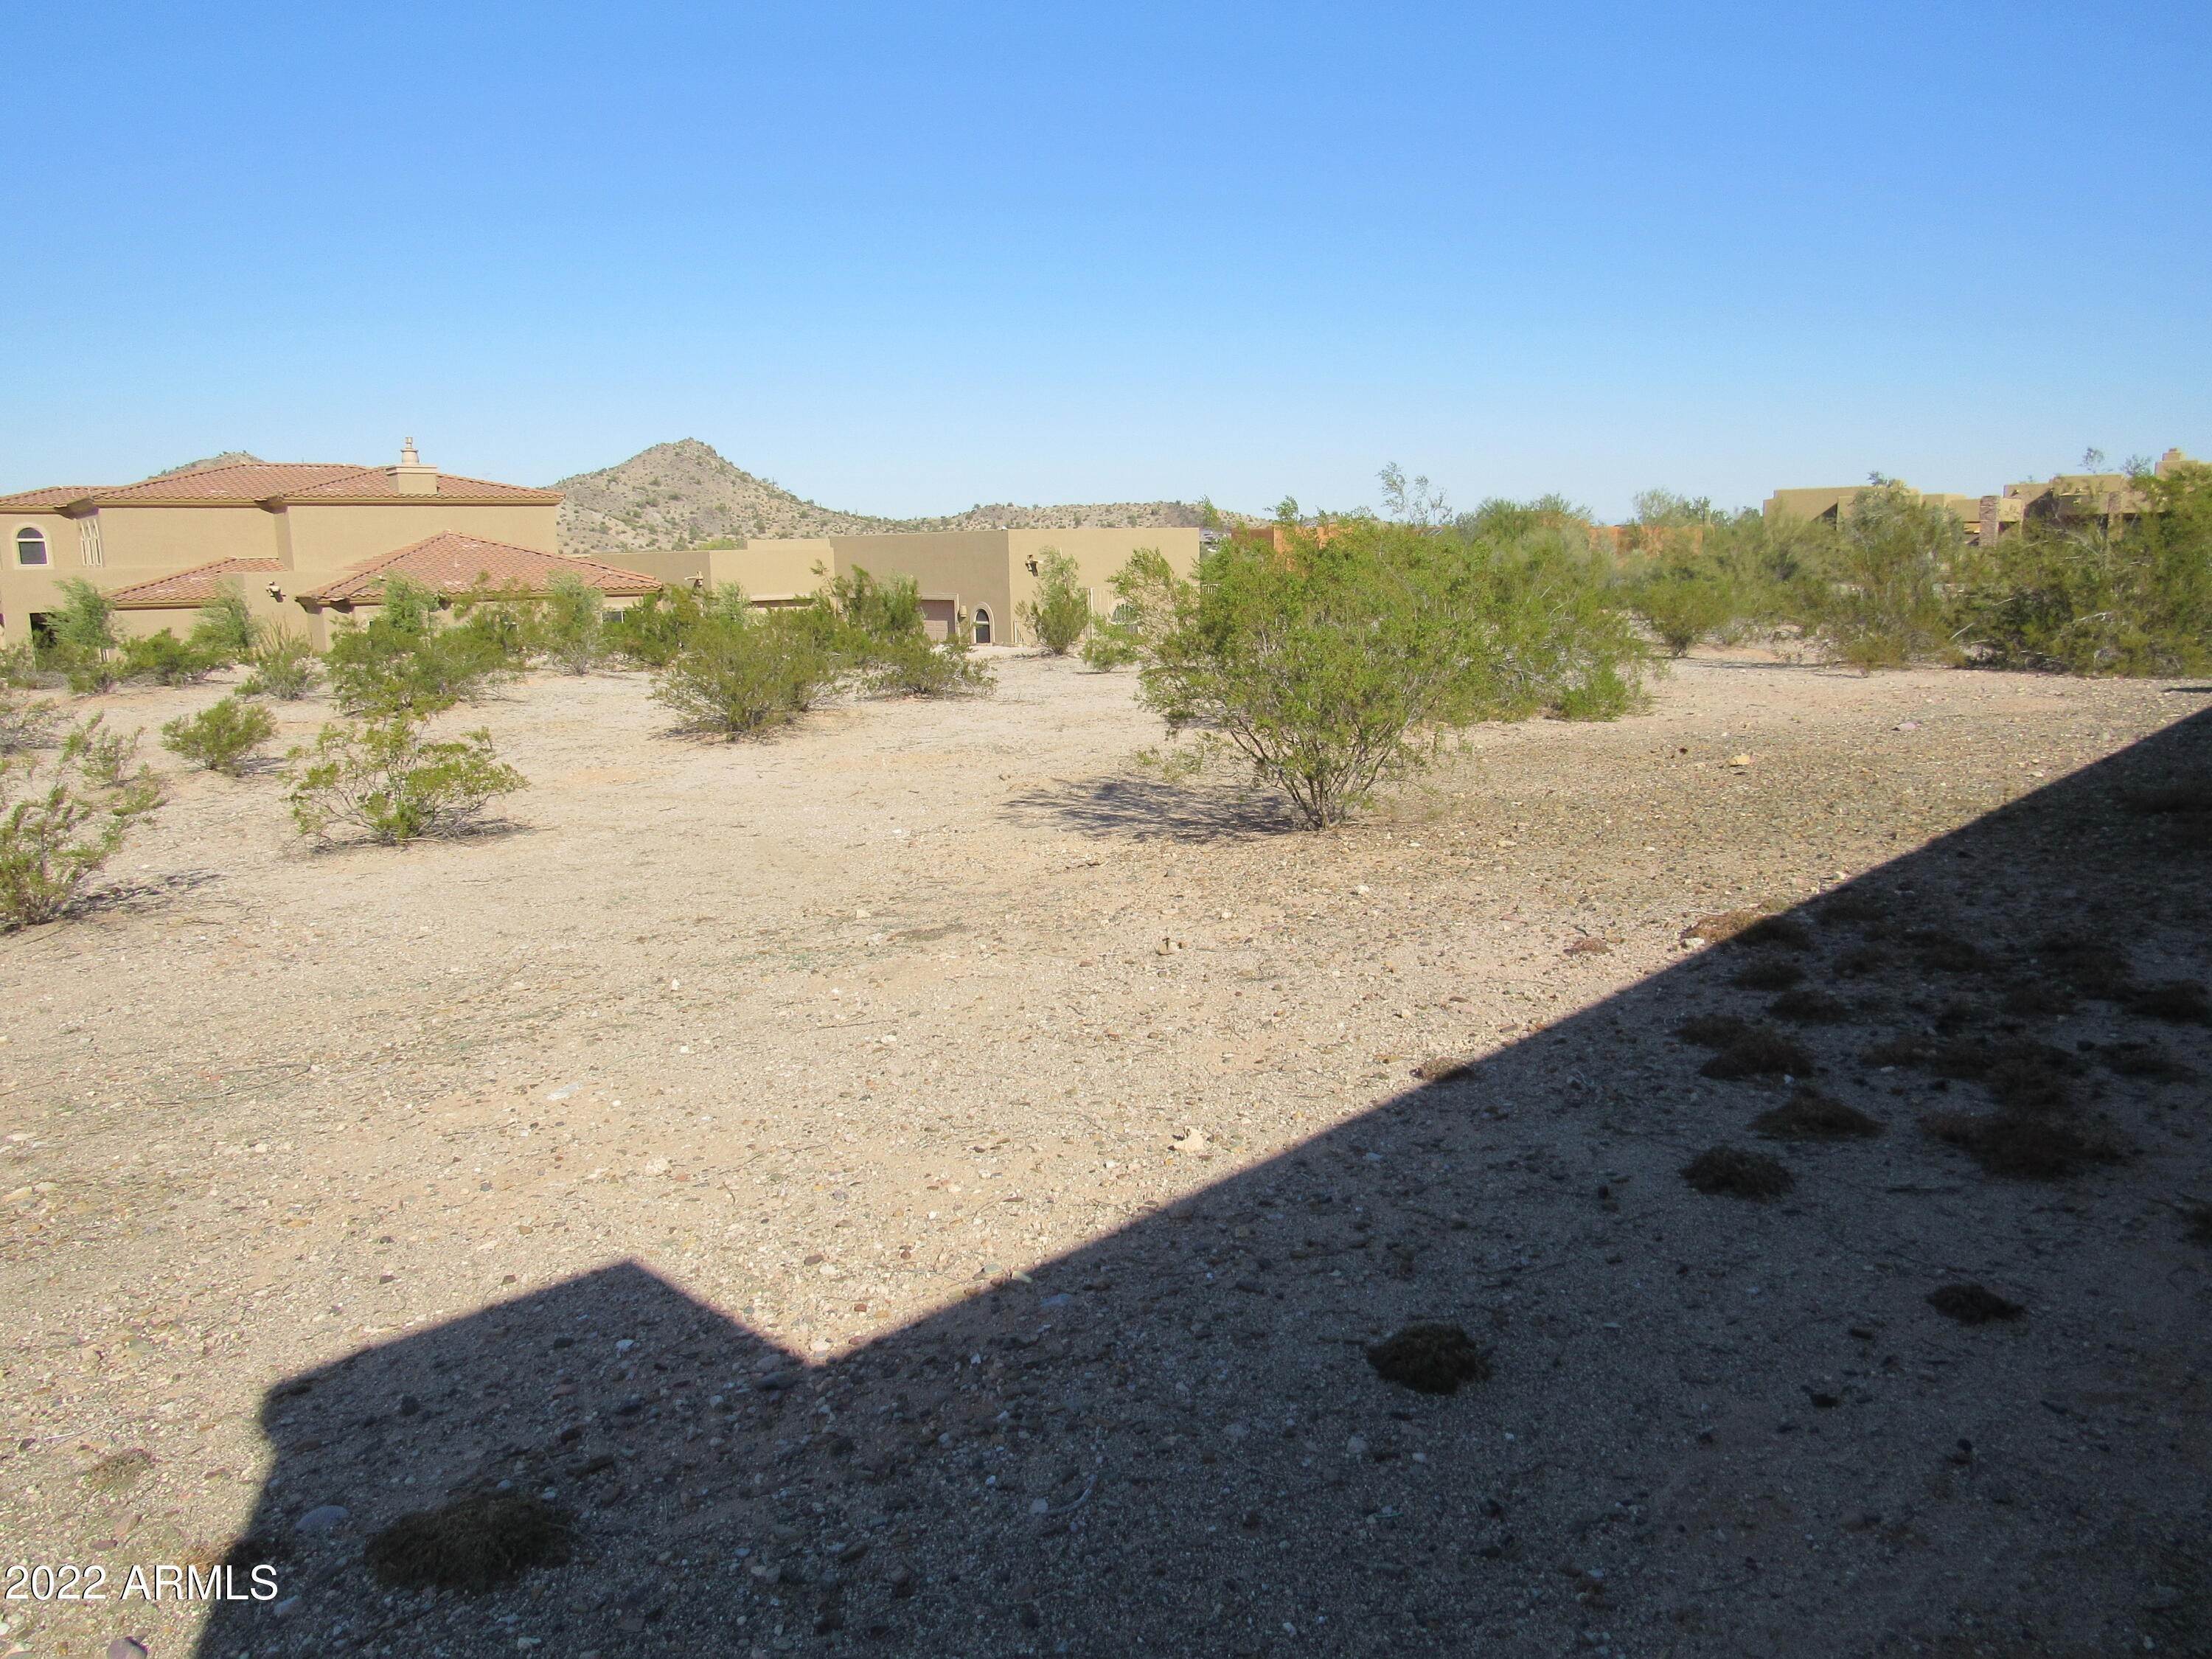 6. Land for Sale at Goodyear, AZ 85338